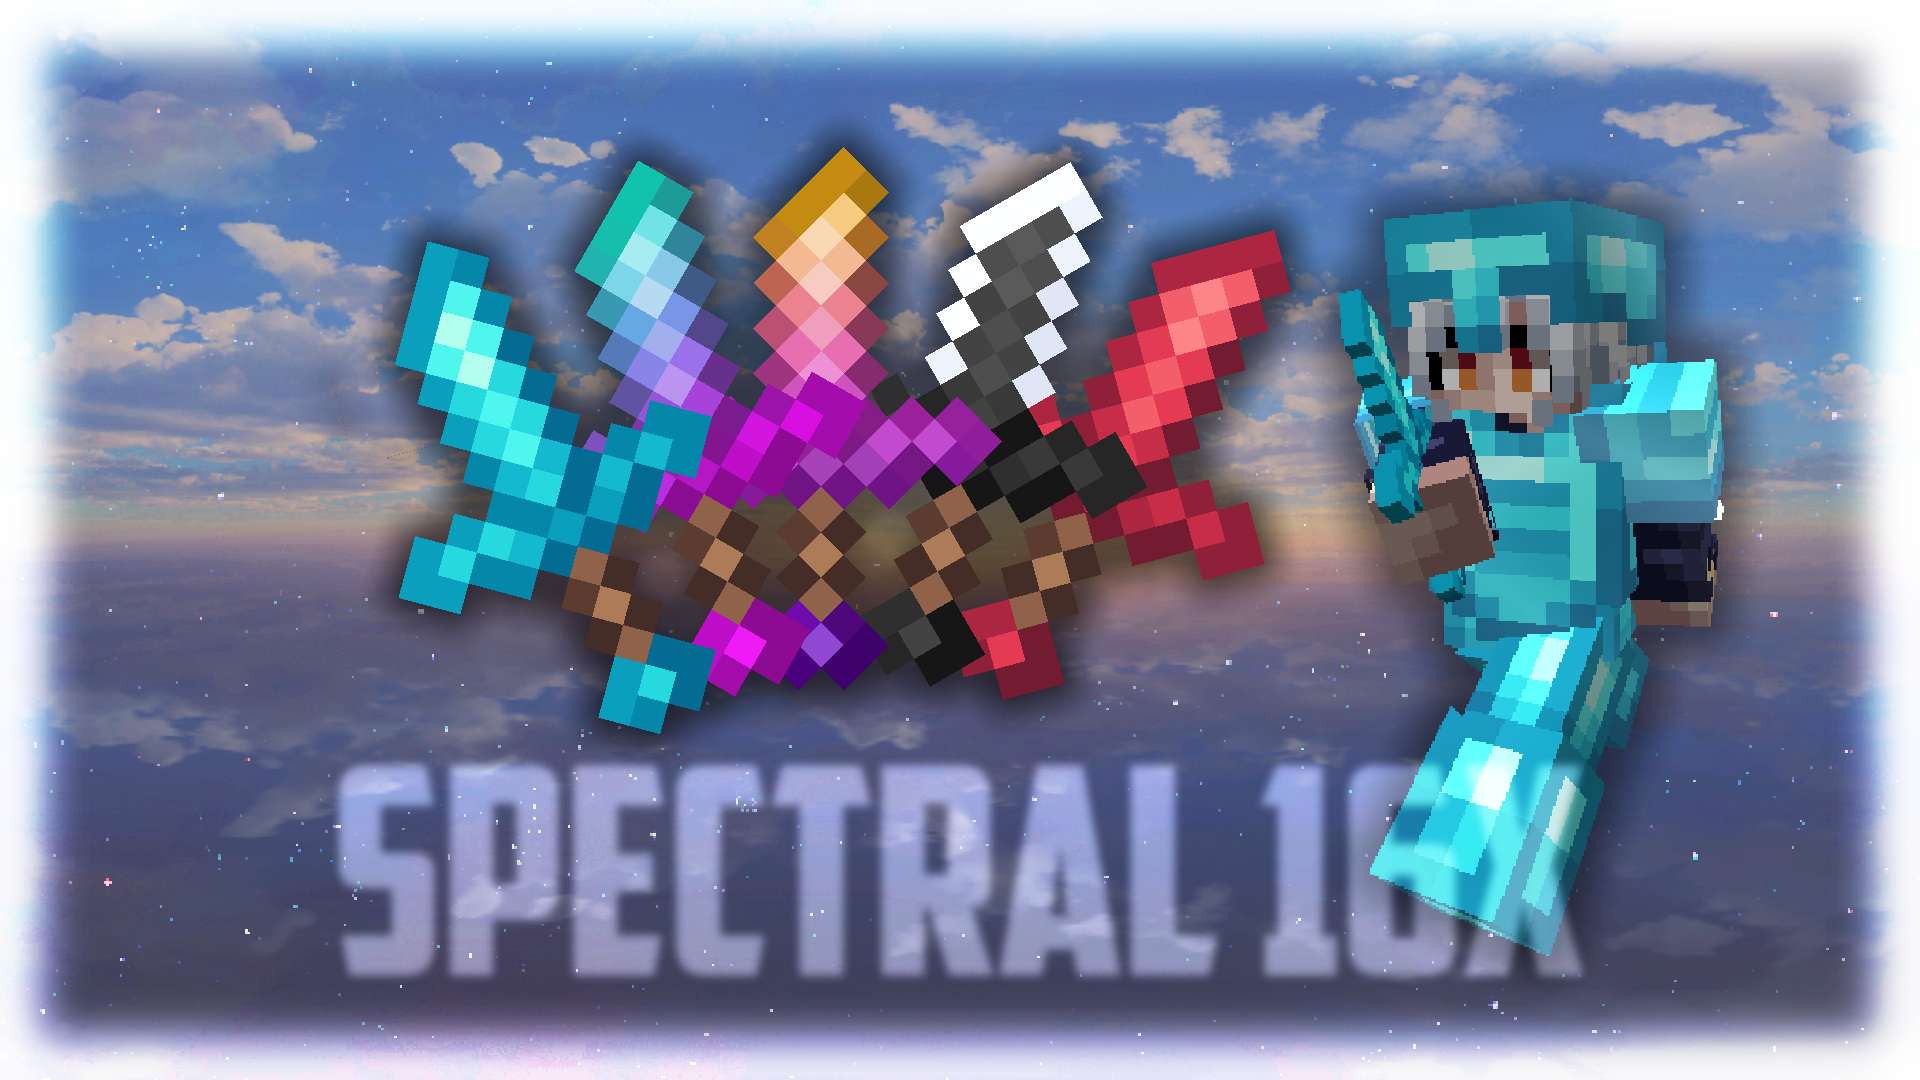 Spectral - Red 16 by Zlax on PvPRP